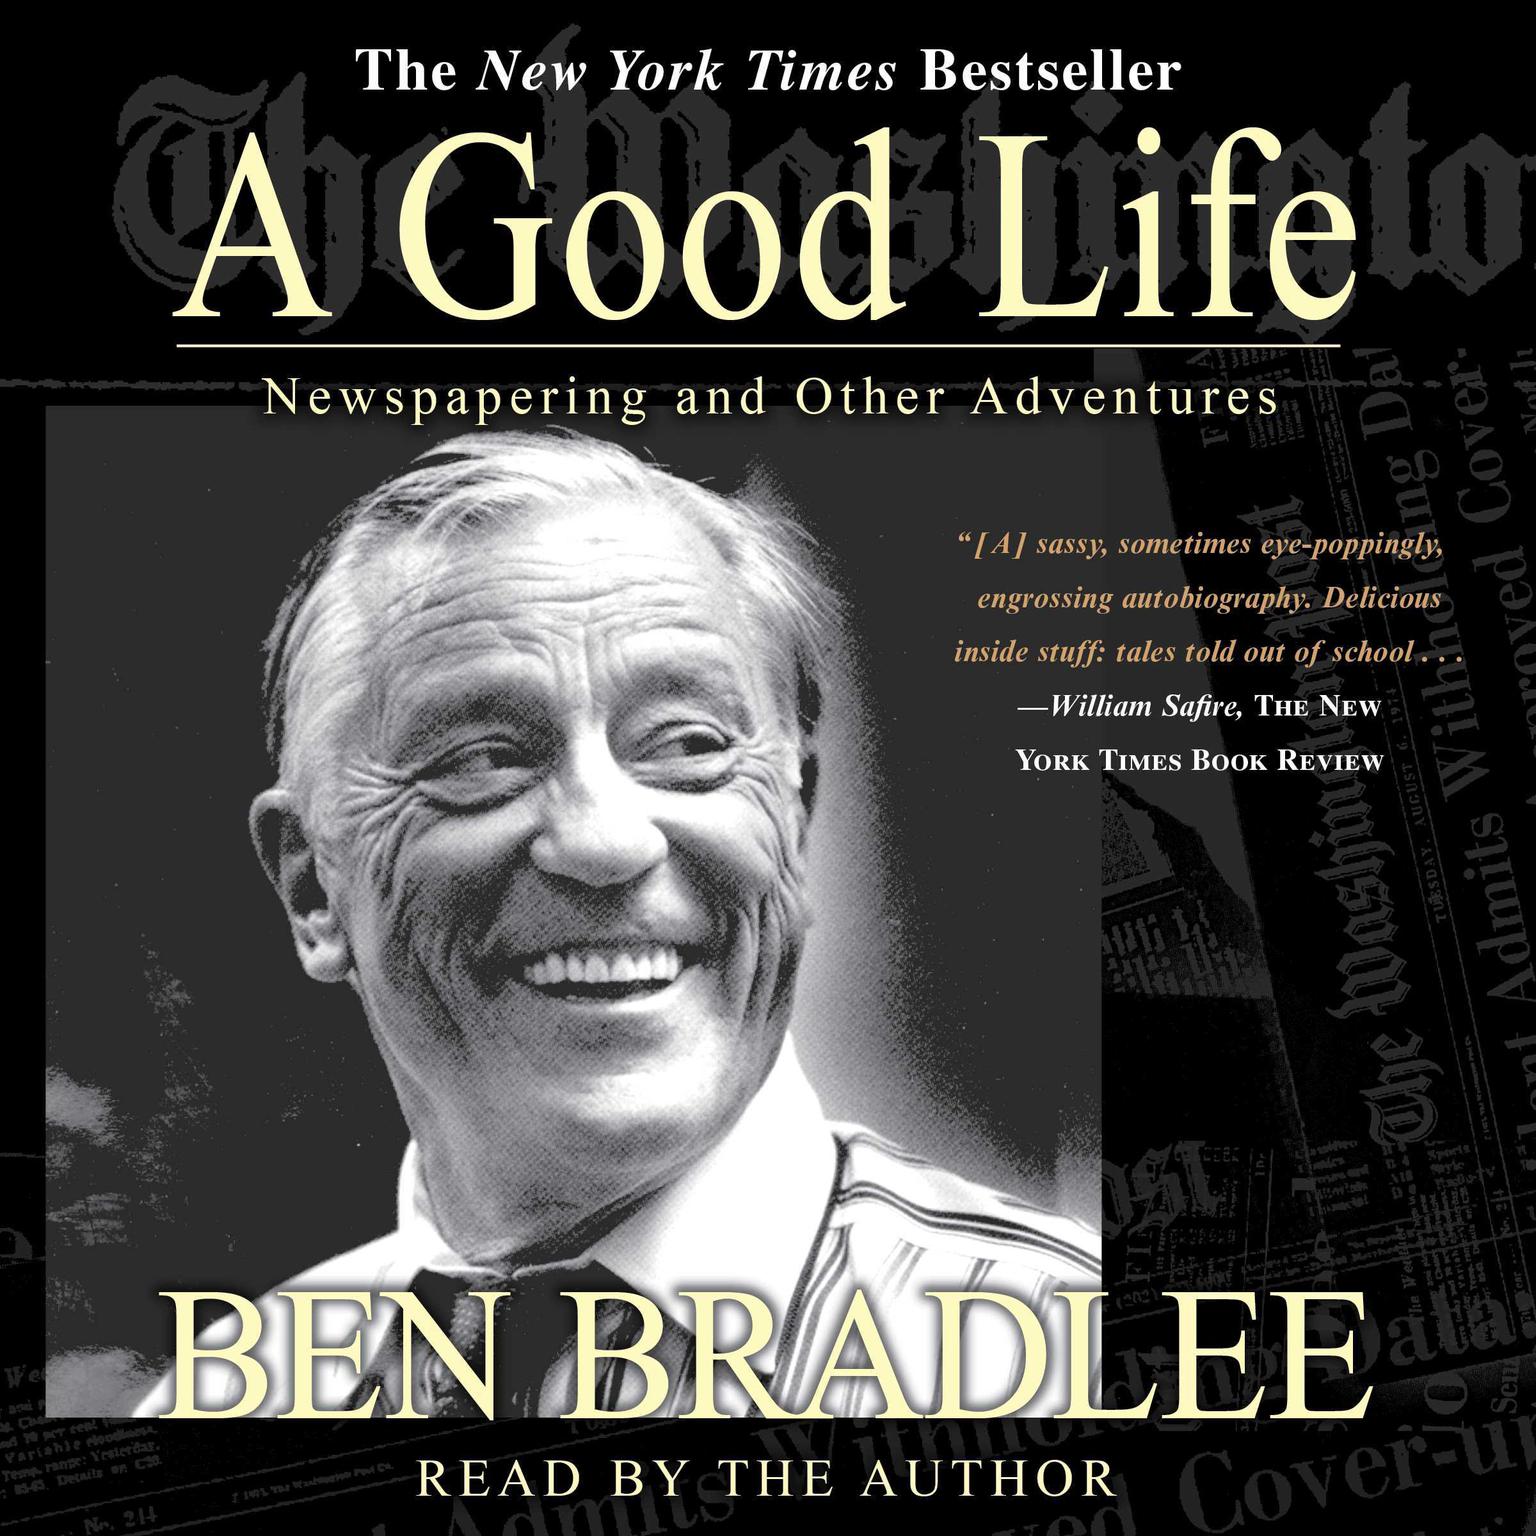 A Good Life (Abridged): A Newspapering and Other Adventures Audiobook, by Ben Bradlee